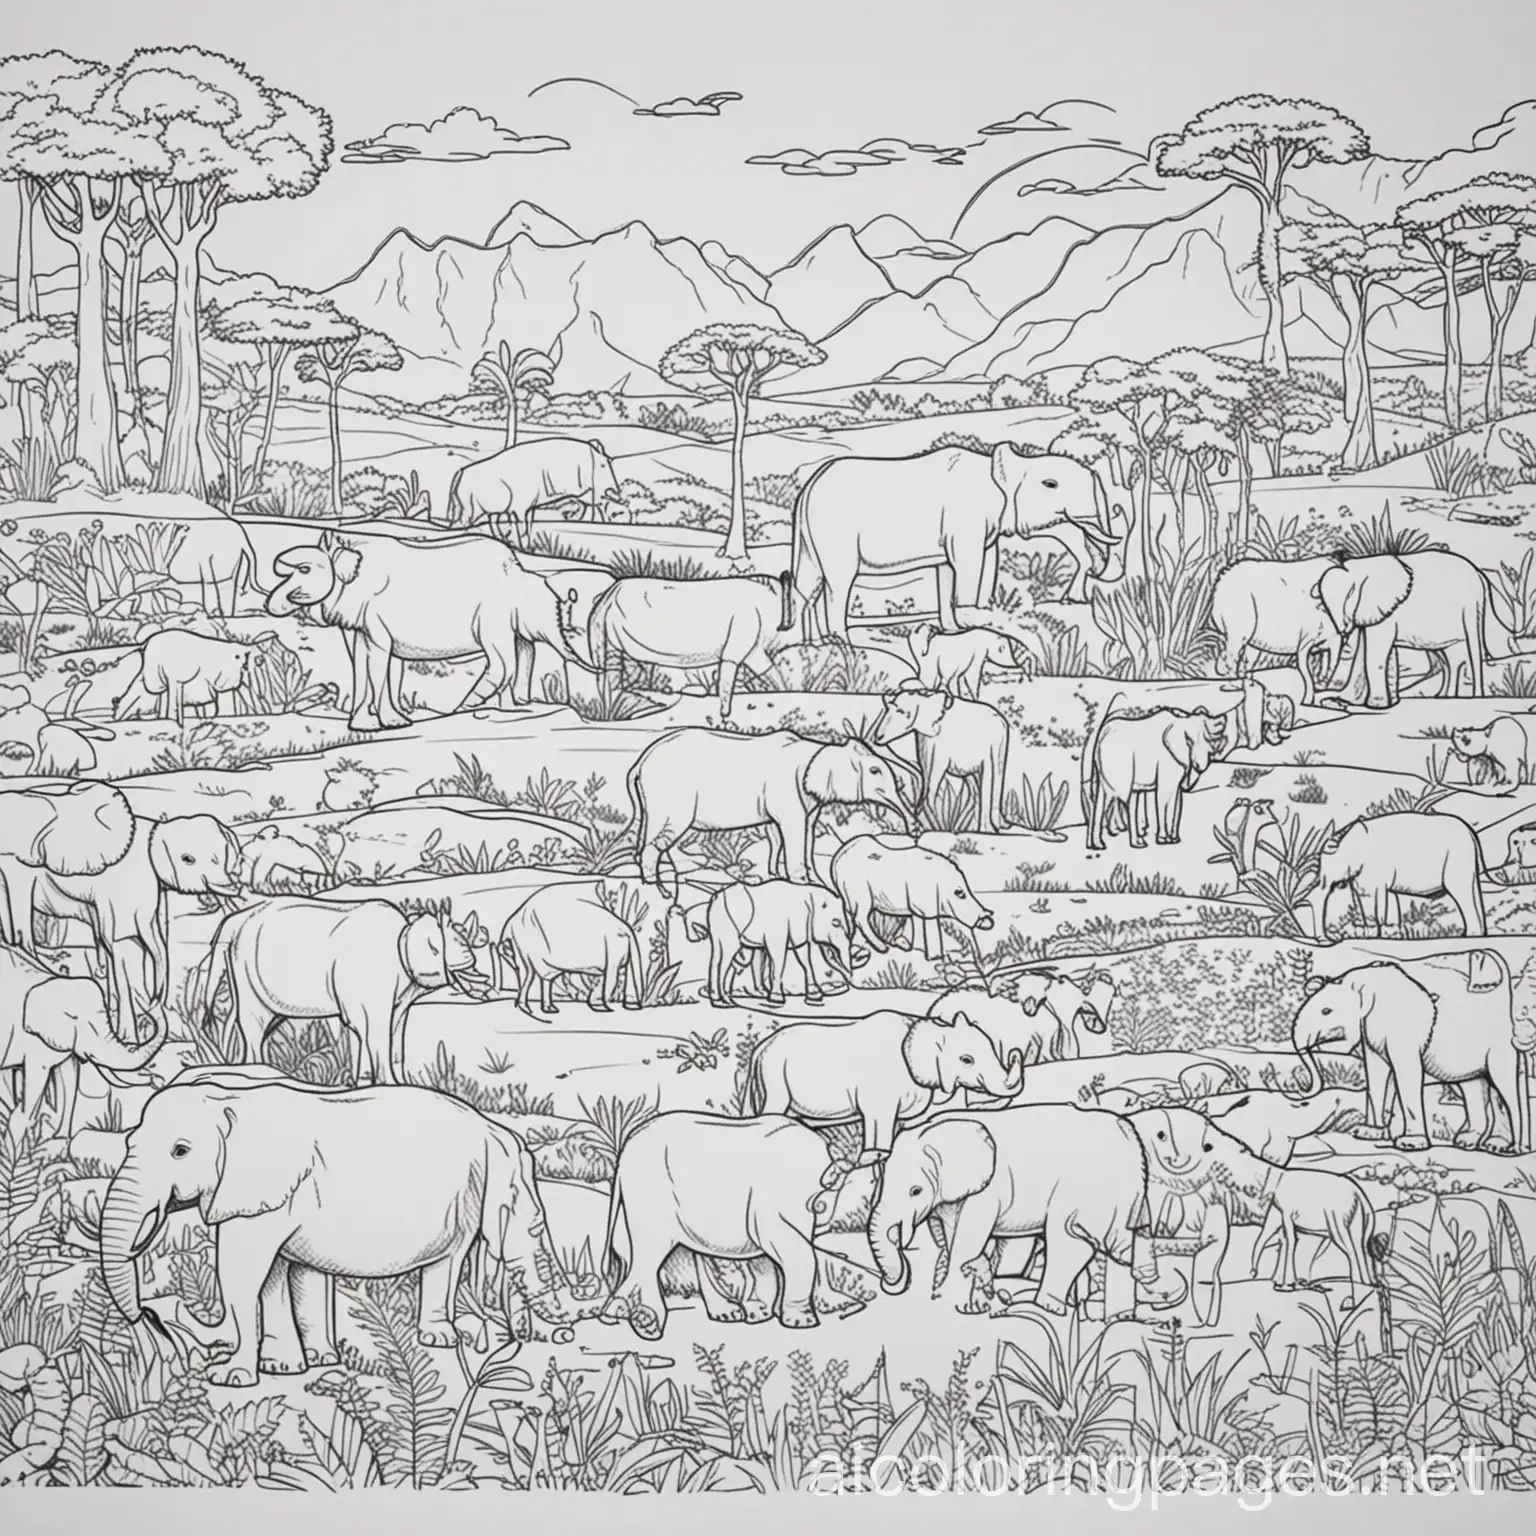 Explore animals from various continents, showcasing their habitats and unique features., Coloring Page, black and white, line art, white background, Simplicity, Ample White Space. The background of the coloring page is plain white to make it easy for young children to color within the lines. The outlines of all the subjects are easy to distinguish, making it simple for kids to color without too much difficulty